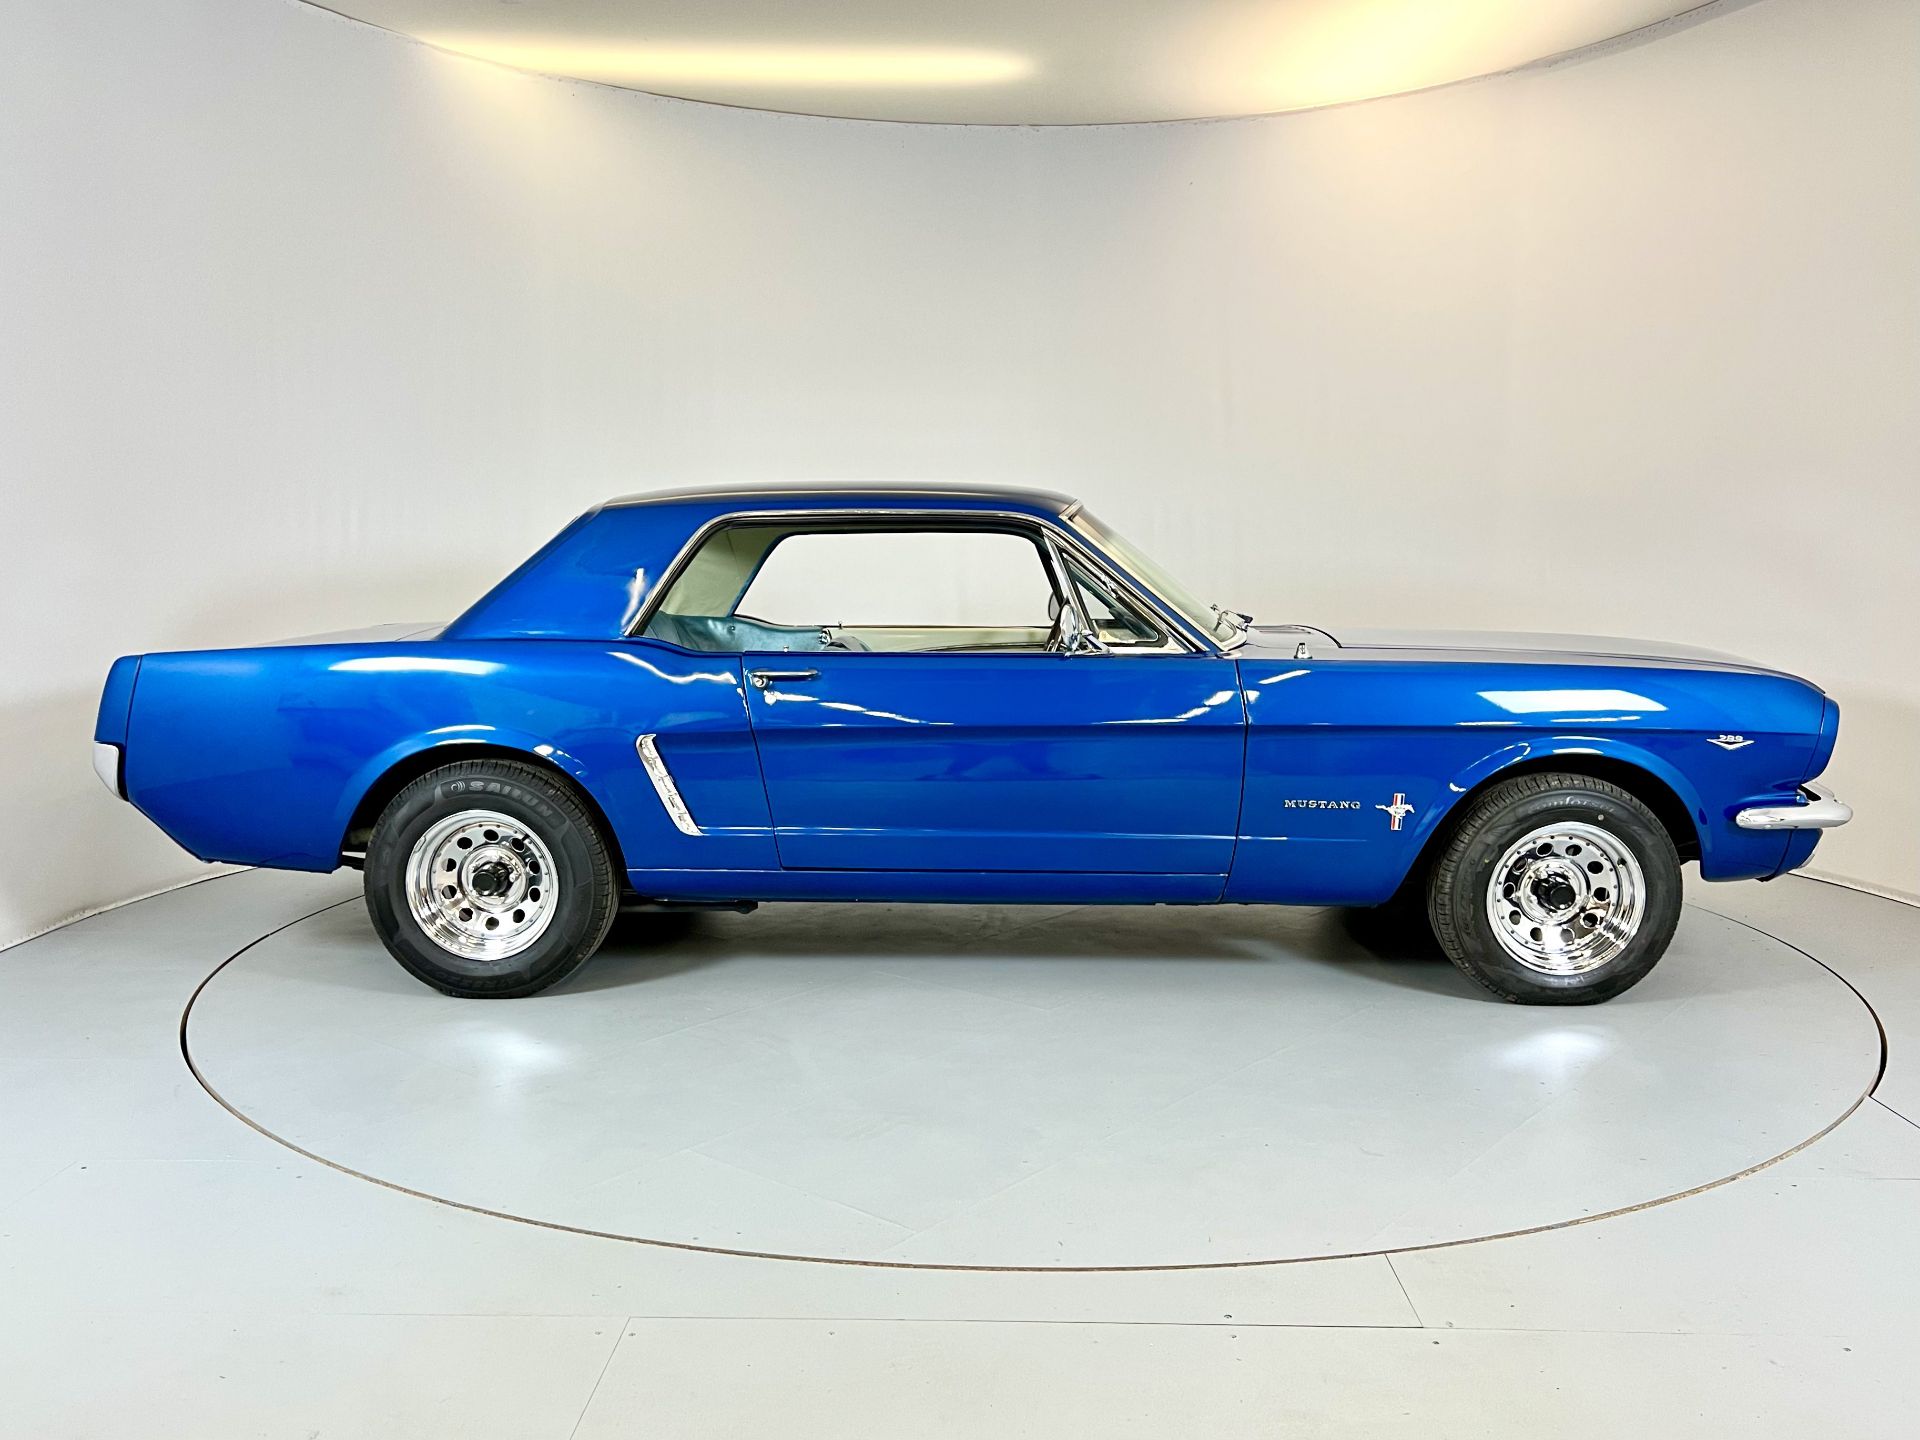 Ford Mustang 289 Coupe 'A Code' - Image 10 of 29